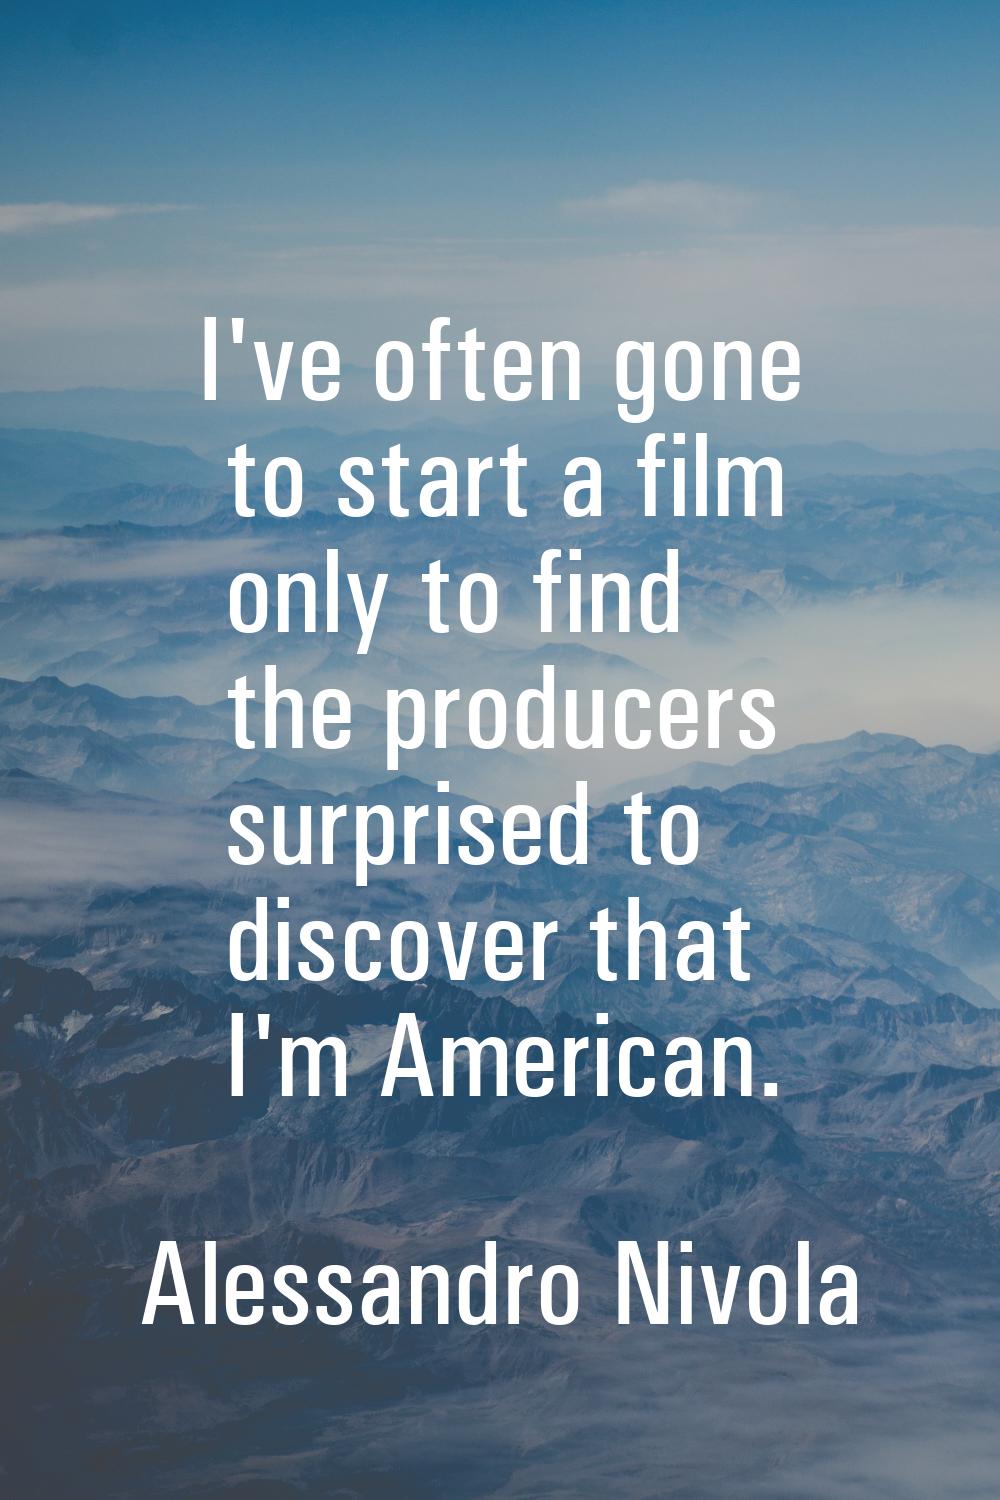 I've often gone to start a film only to find the producers surprised to discover that I'm American.